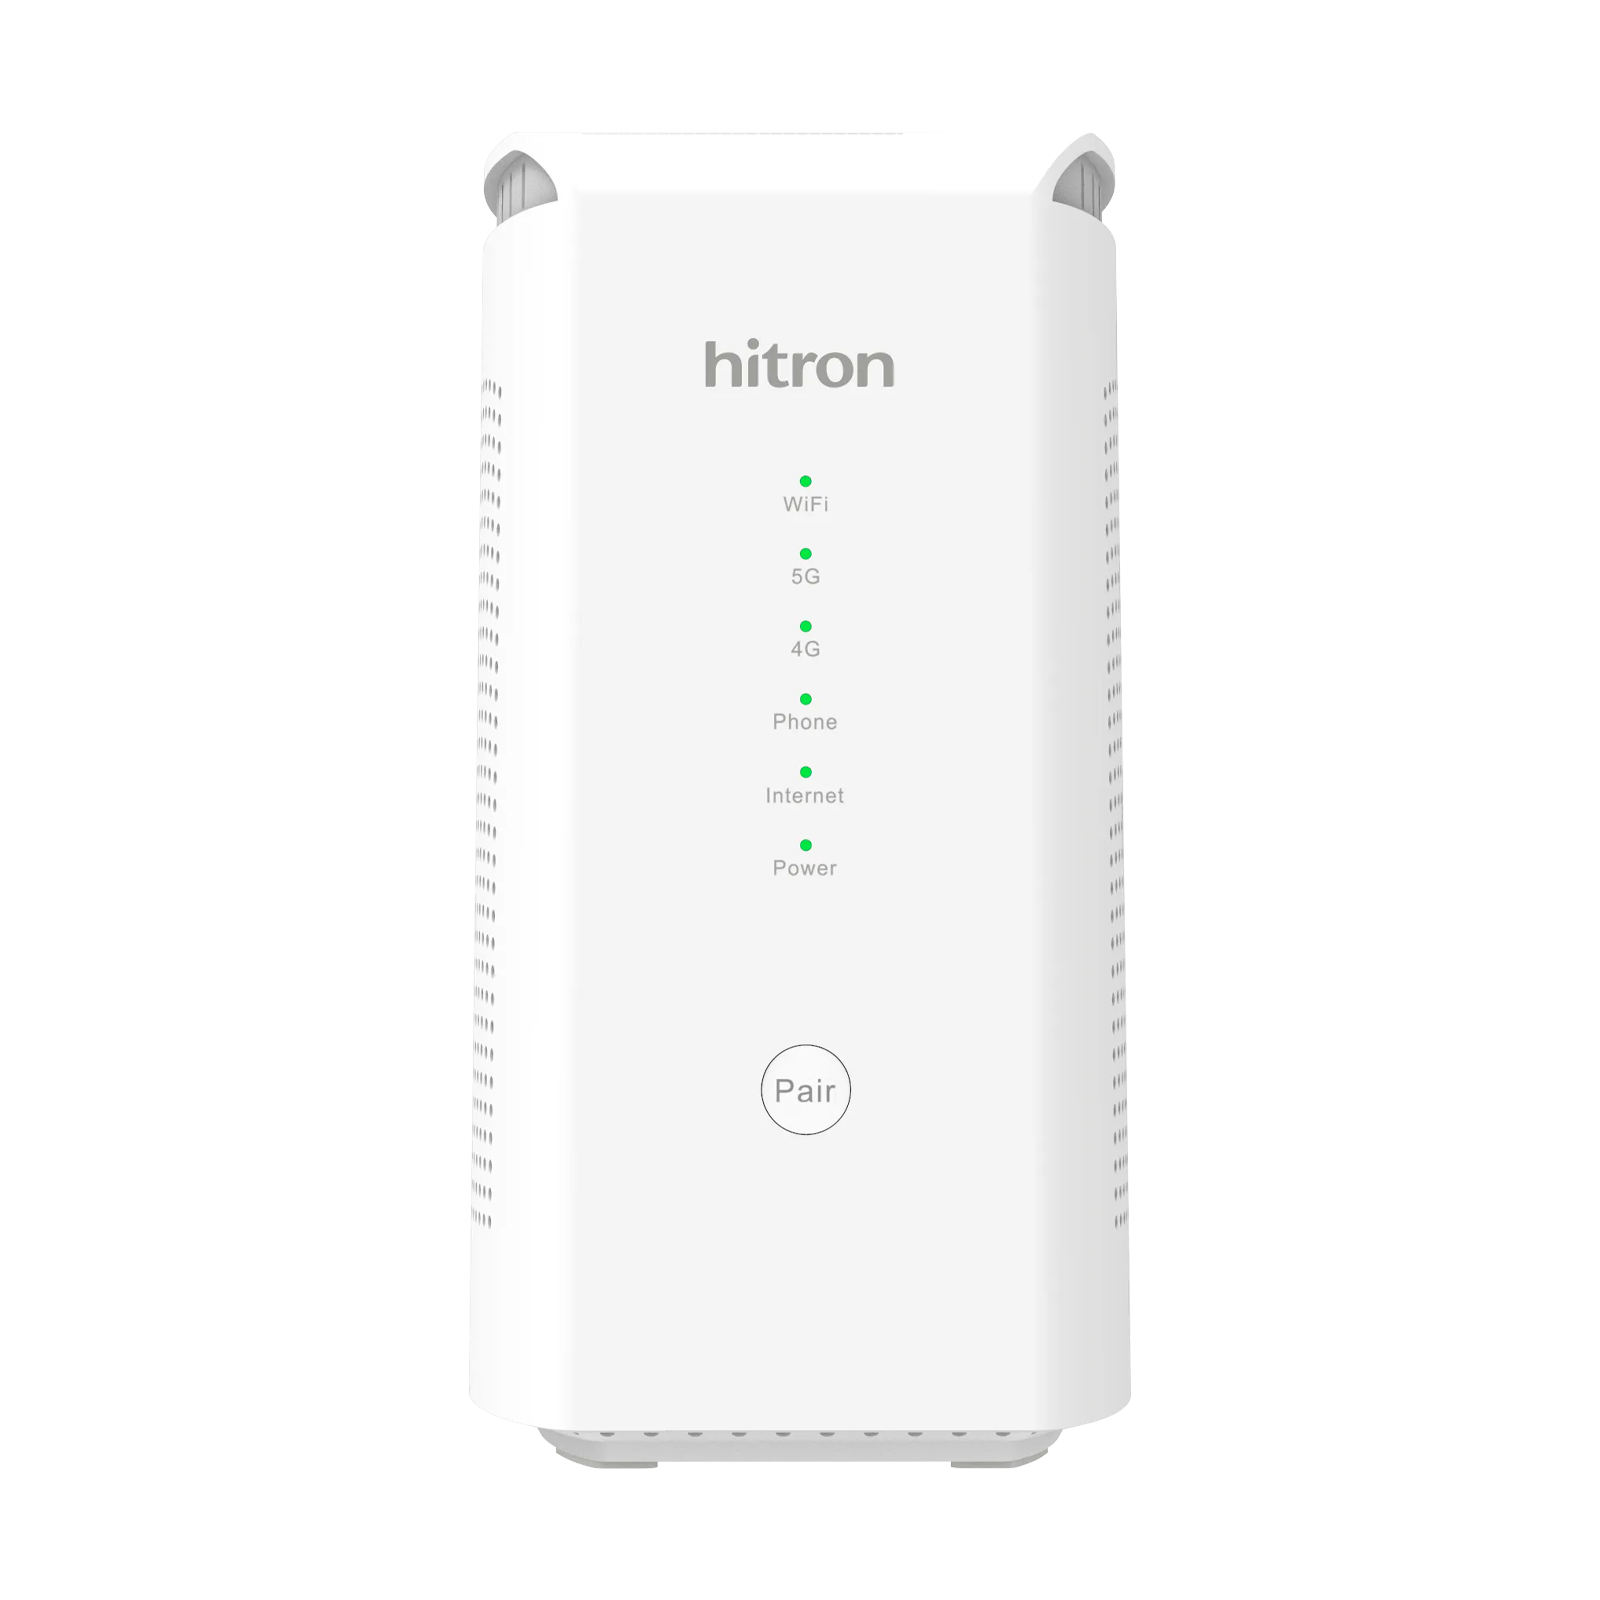 DOCSIS 3.1 Cable Modem from Hitron - CODA57